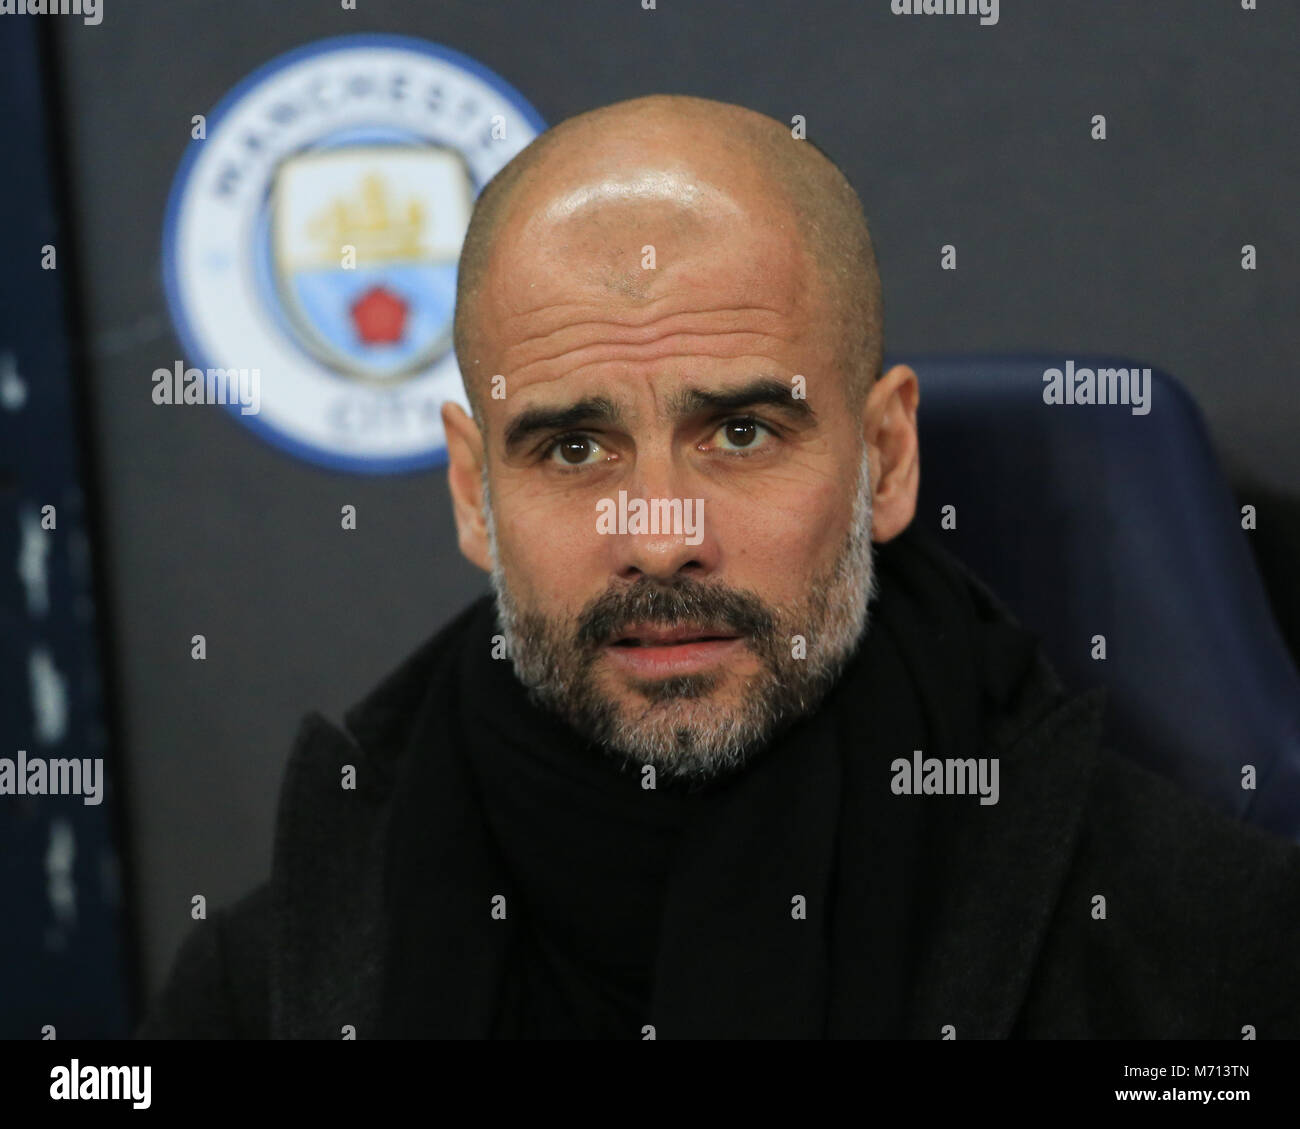 Manchester, UK. Manchester, UK. 7th March 2018 , Champions League Round of 16 leg 2, Manchester City versus FC Basel; Pep Guardiola manager of Manchester City Credit: News Images/Alamy Live News Stock Photo